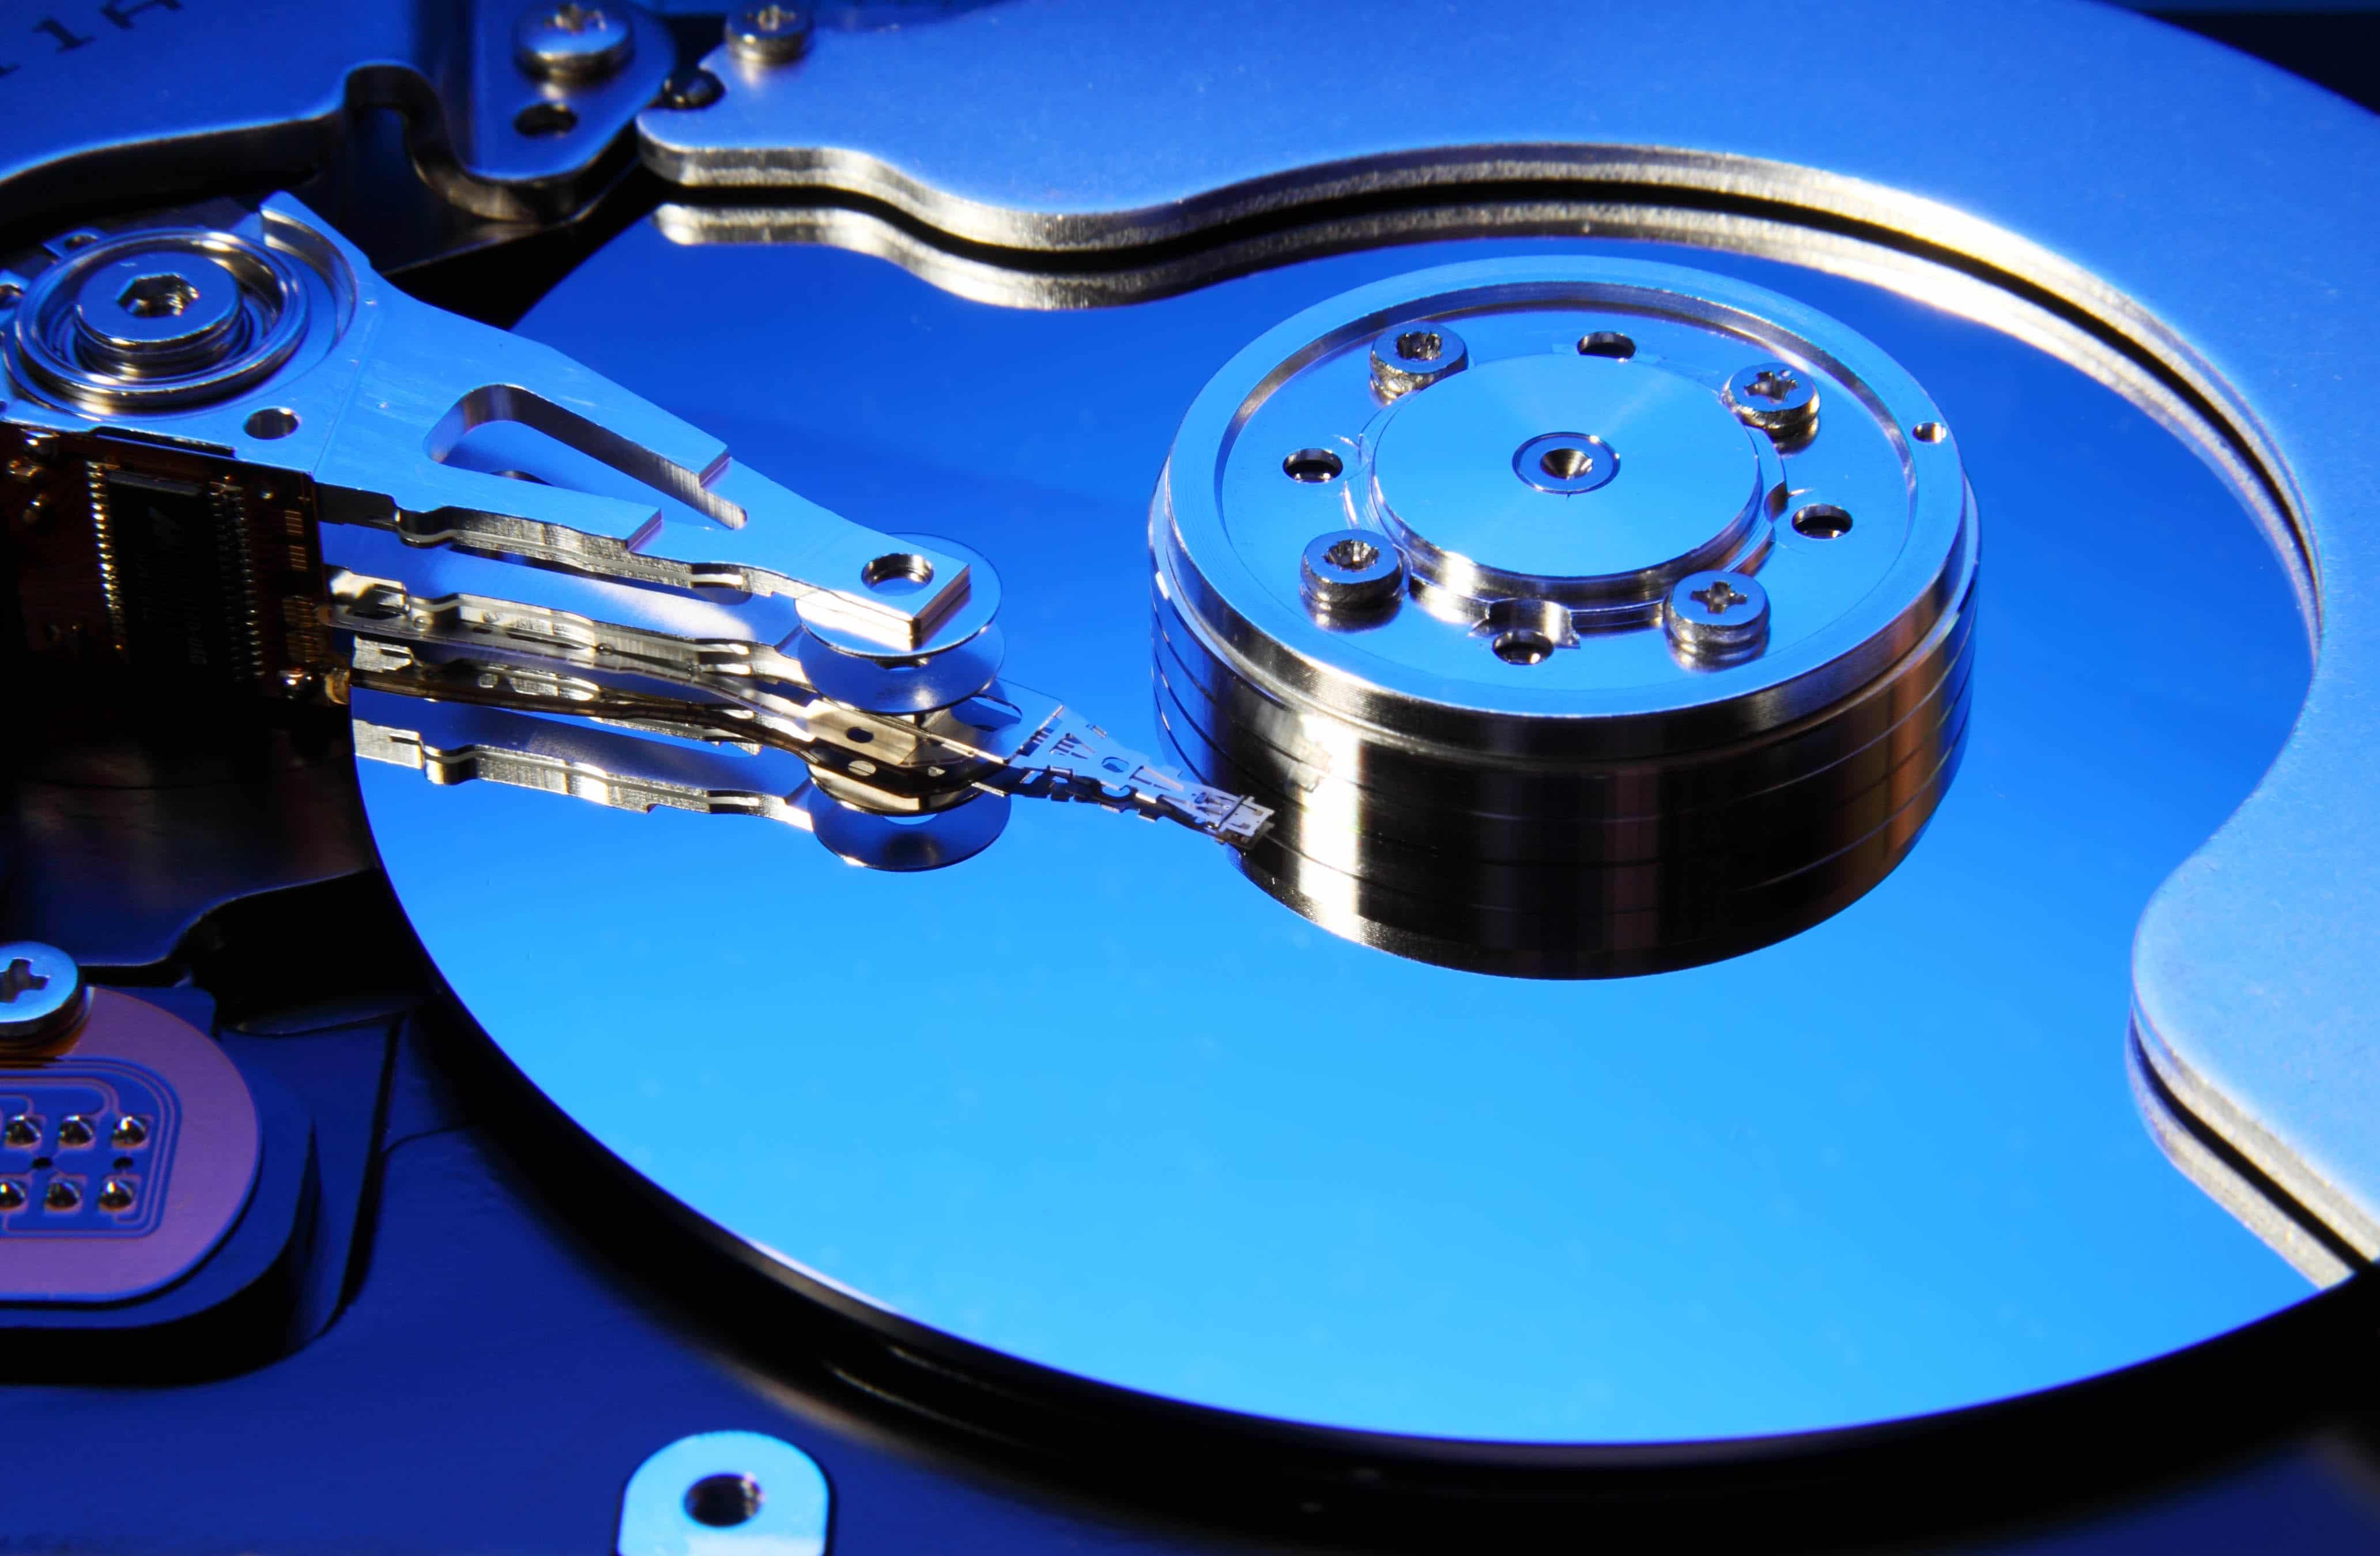 What Type Of Device Is Hard Disk Drive